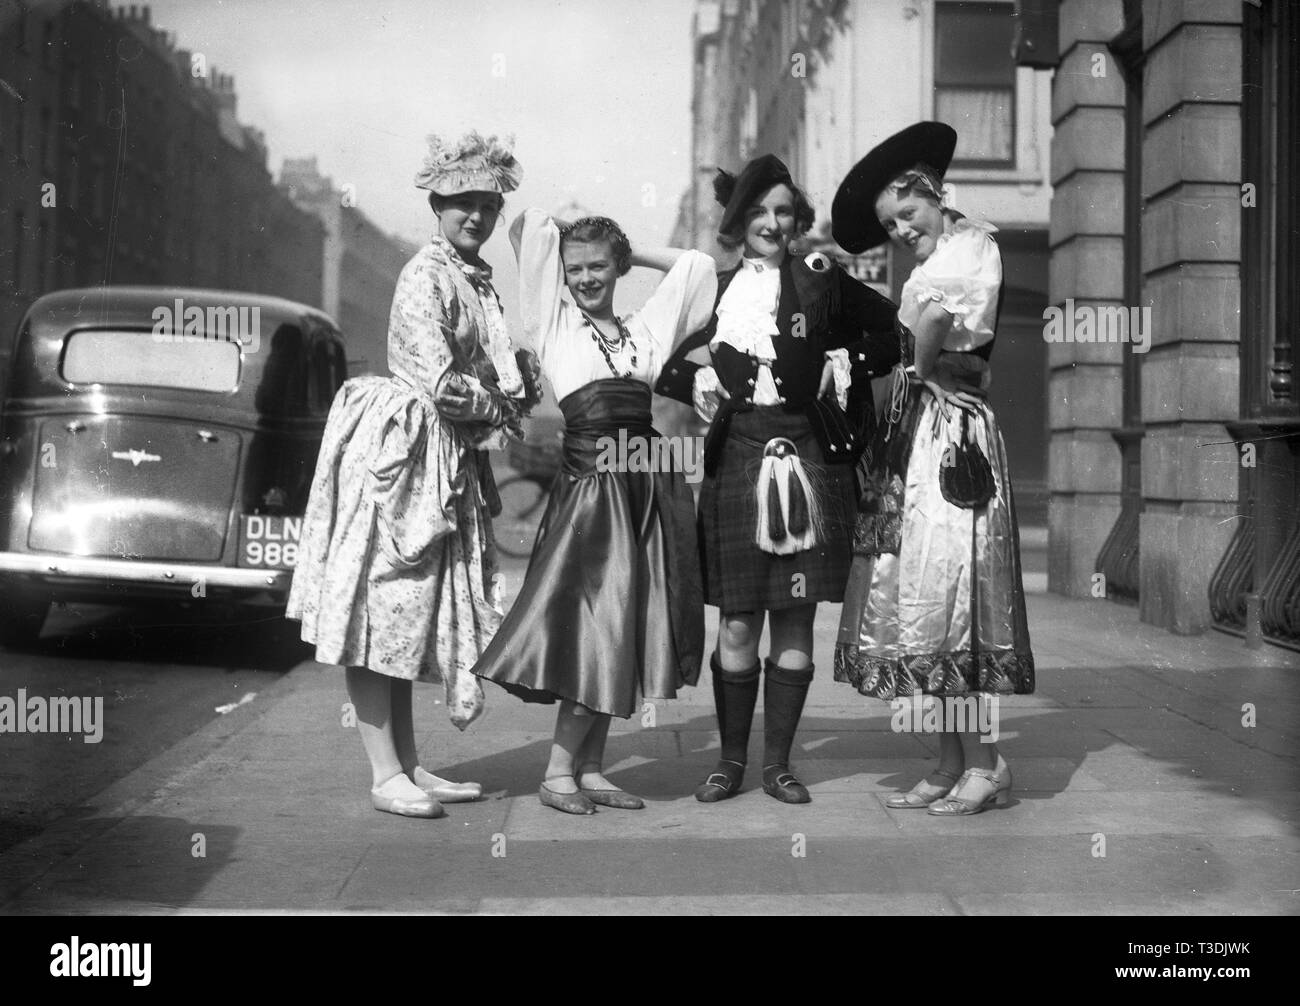 London theatre actress girls in costume 1948 Stock Photo